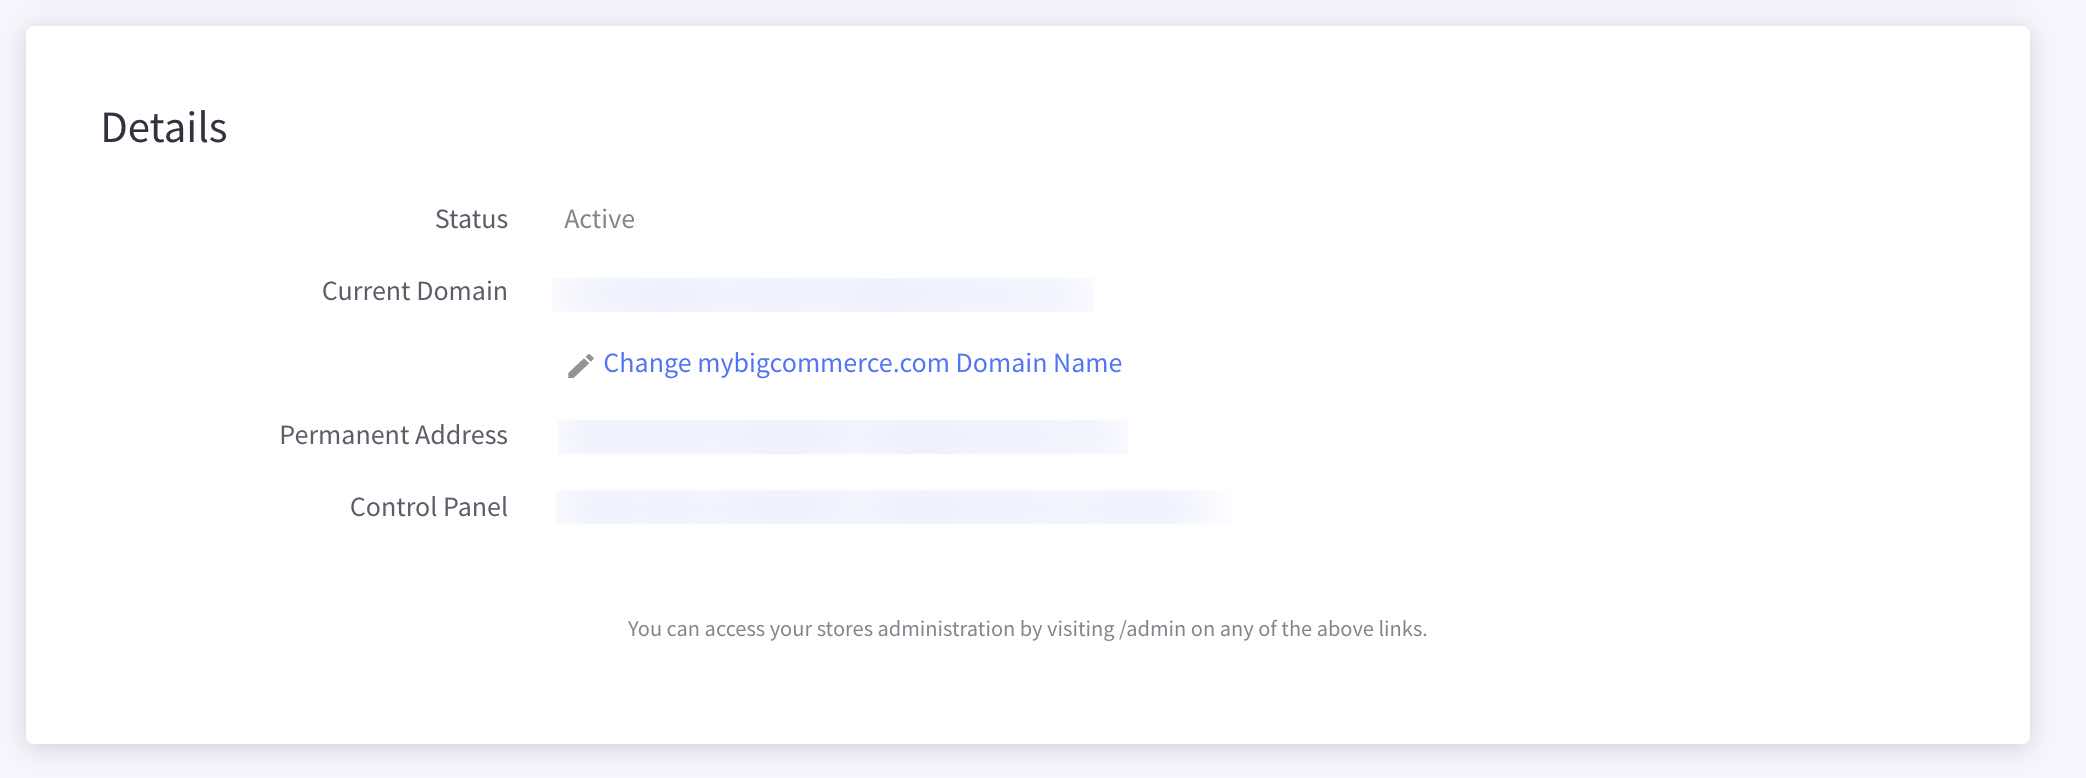 BigCommerce store details page showing permanent address field with blurred address